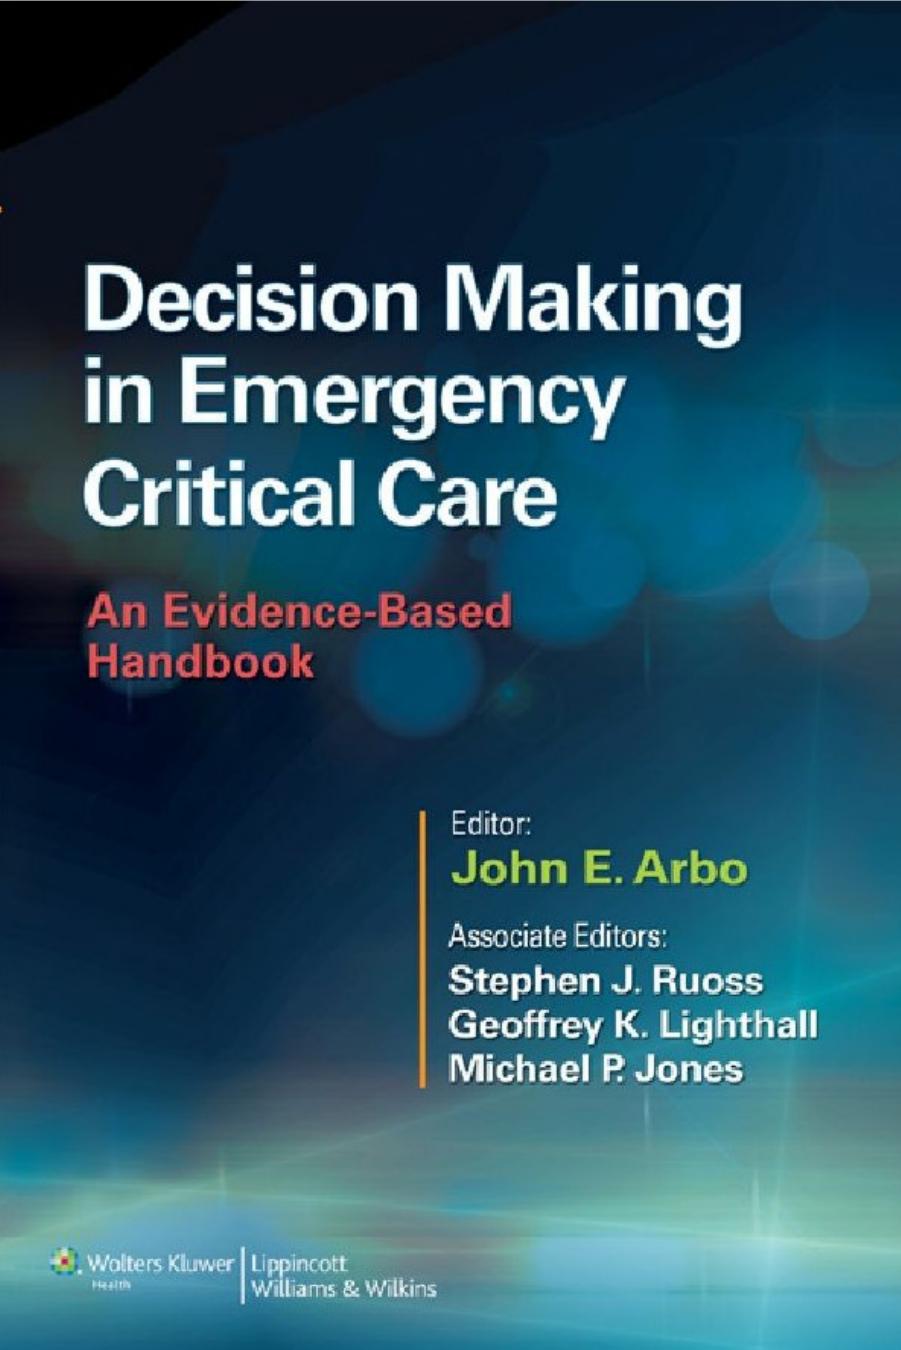 Decision Making in Emergency Critical Care An Evidence-Based Handbook.jpg